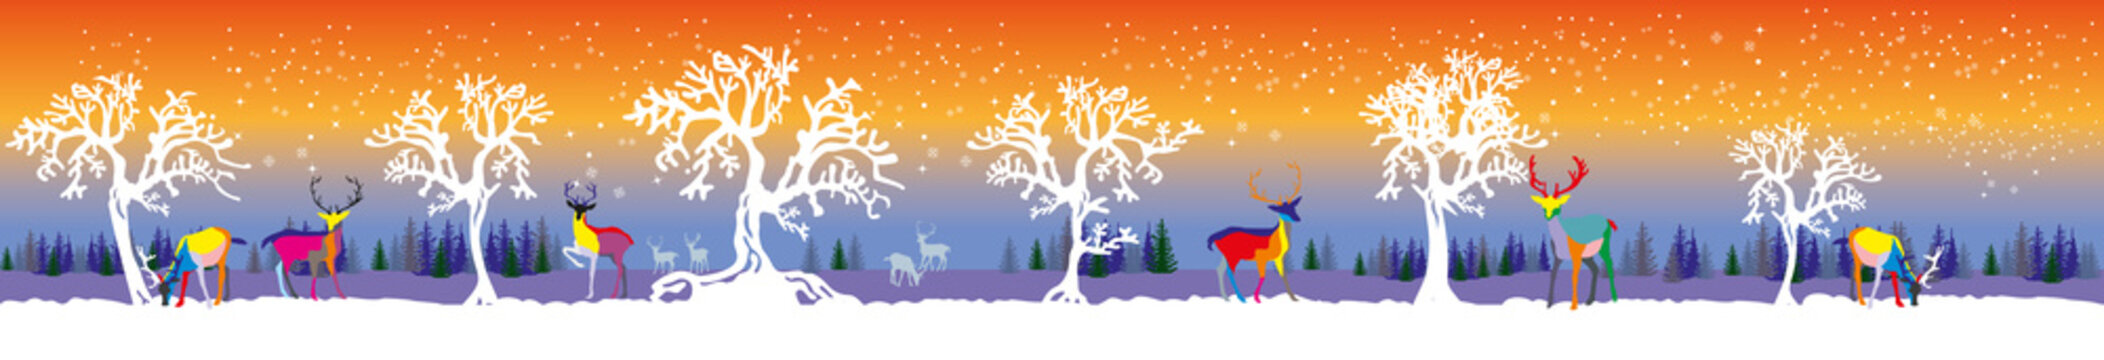 Vector long illustration winter forest with deers and trees